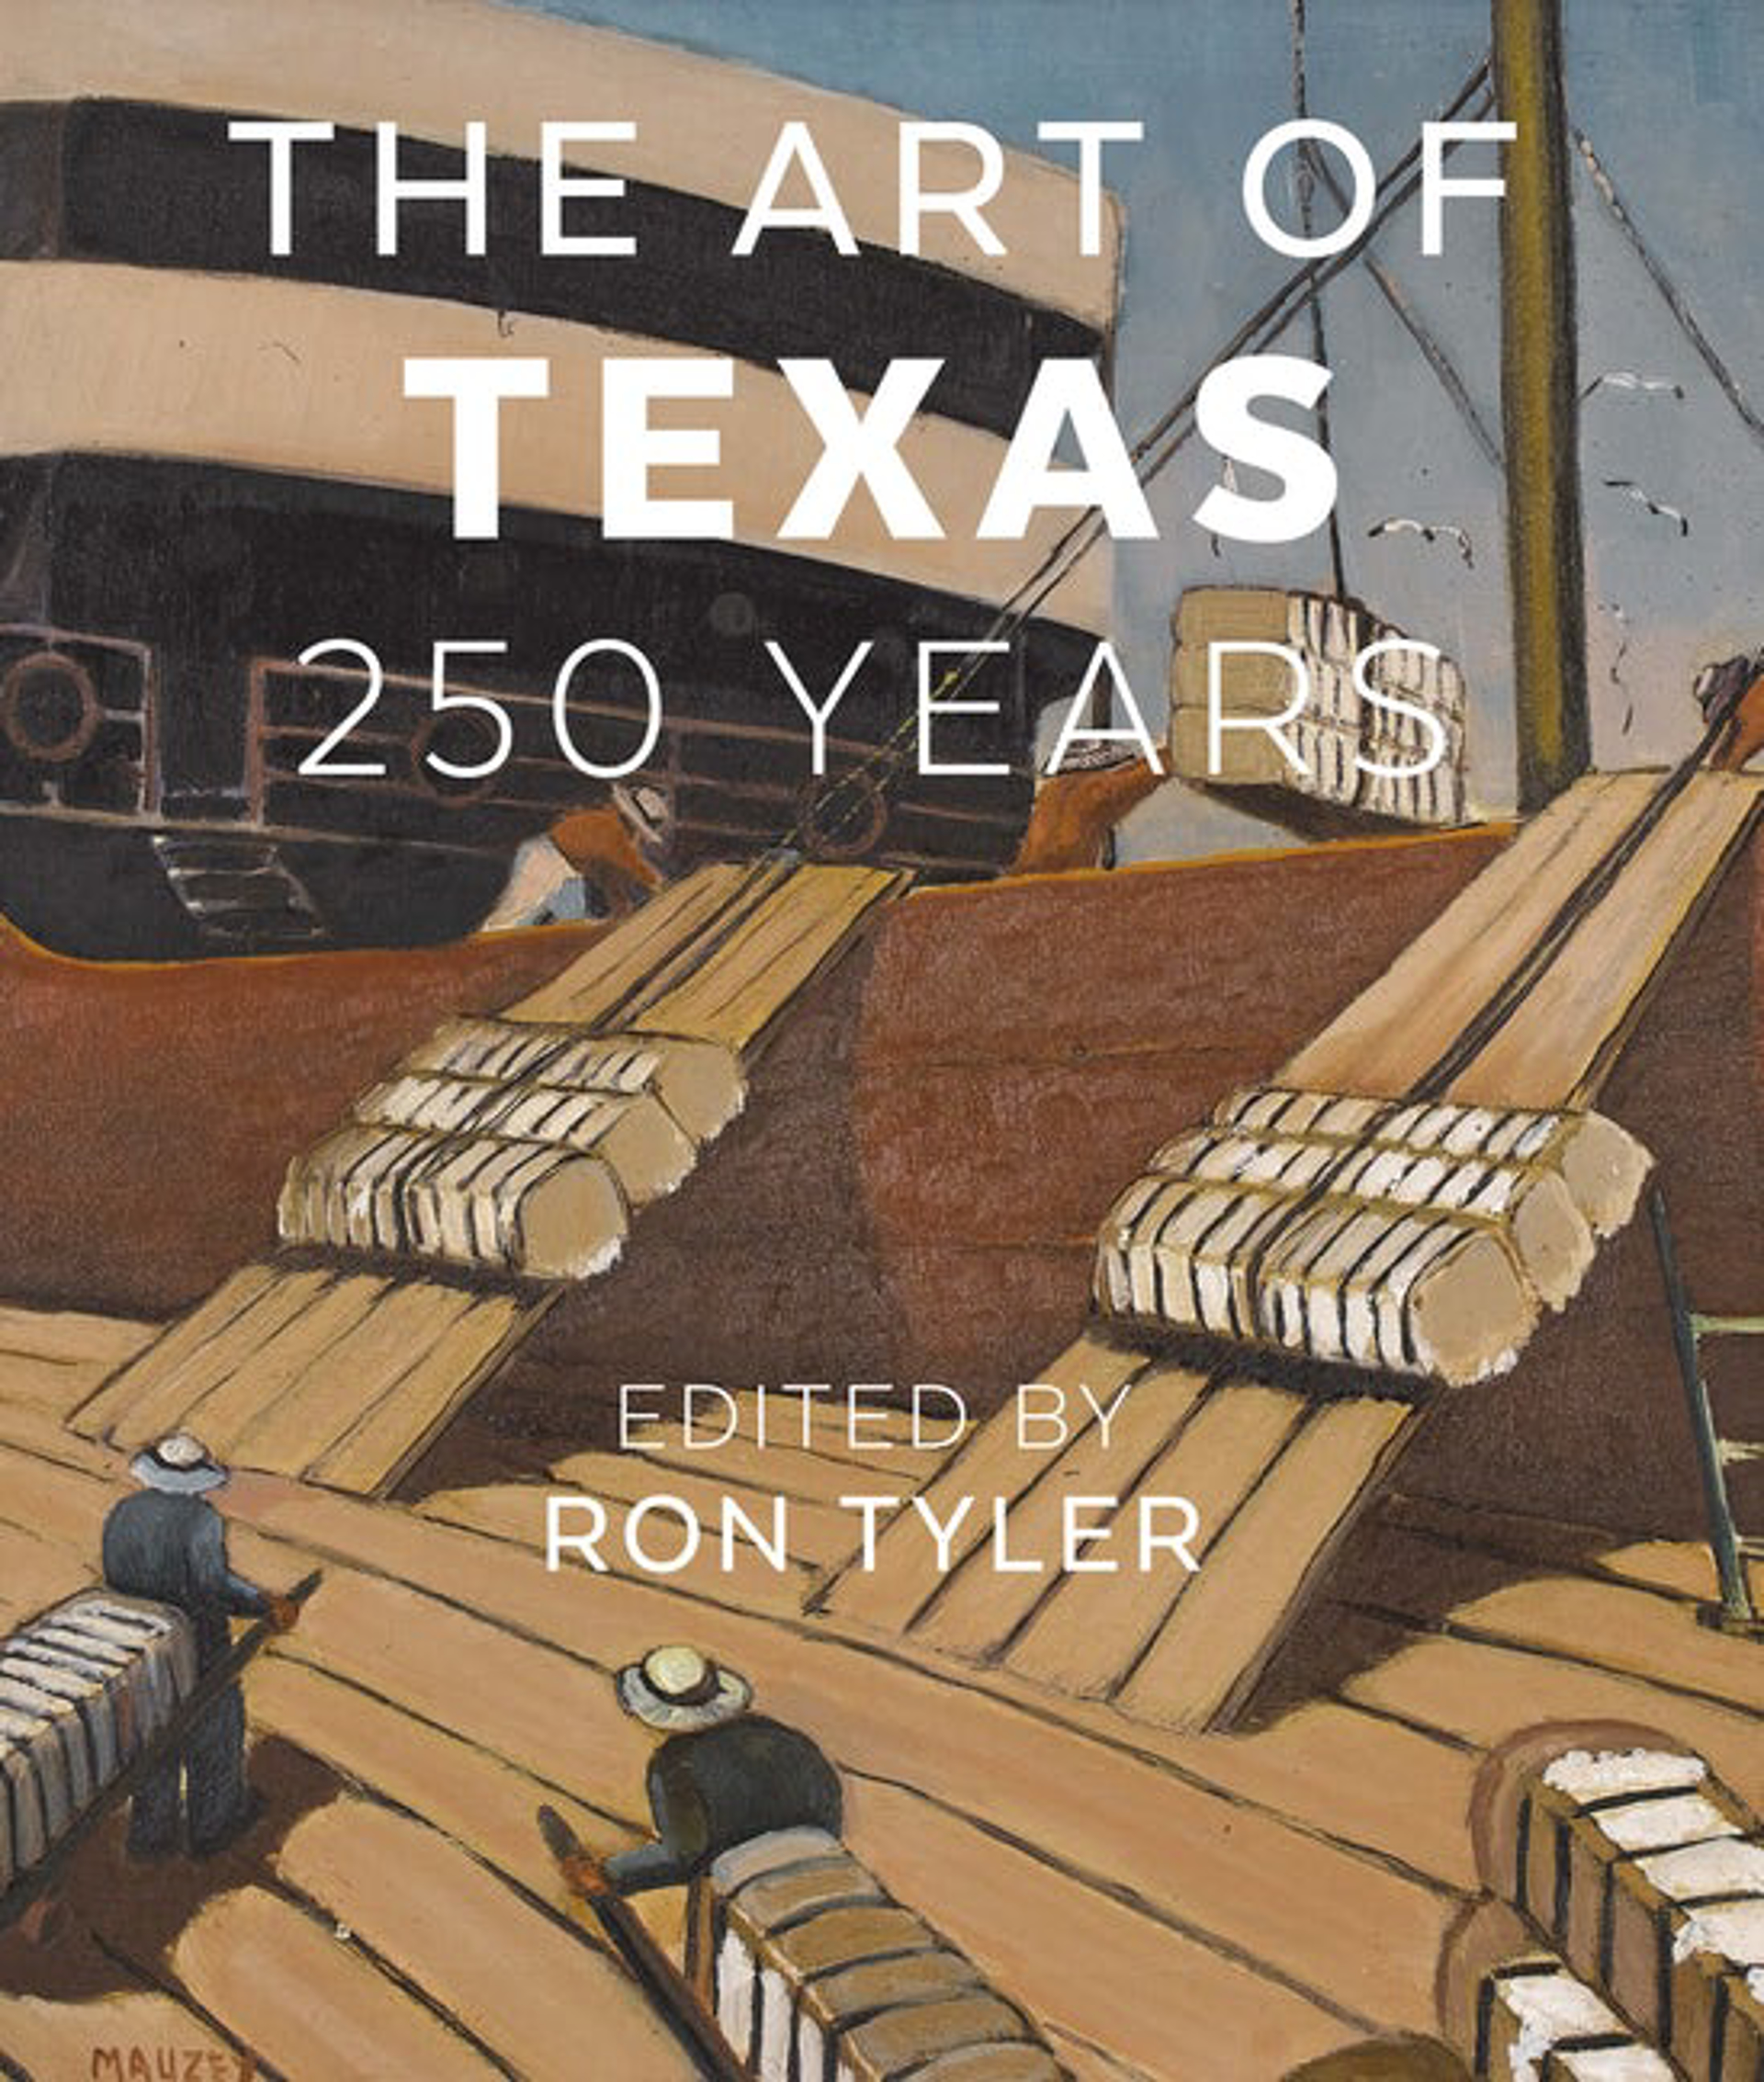 The Art of Texas 250 Years, Edited by Ron Tyler by Publications